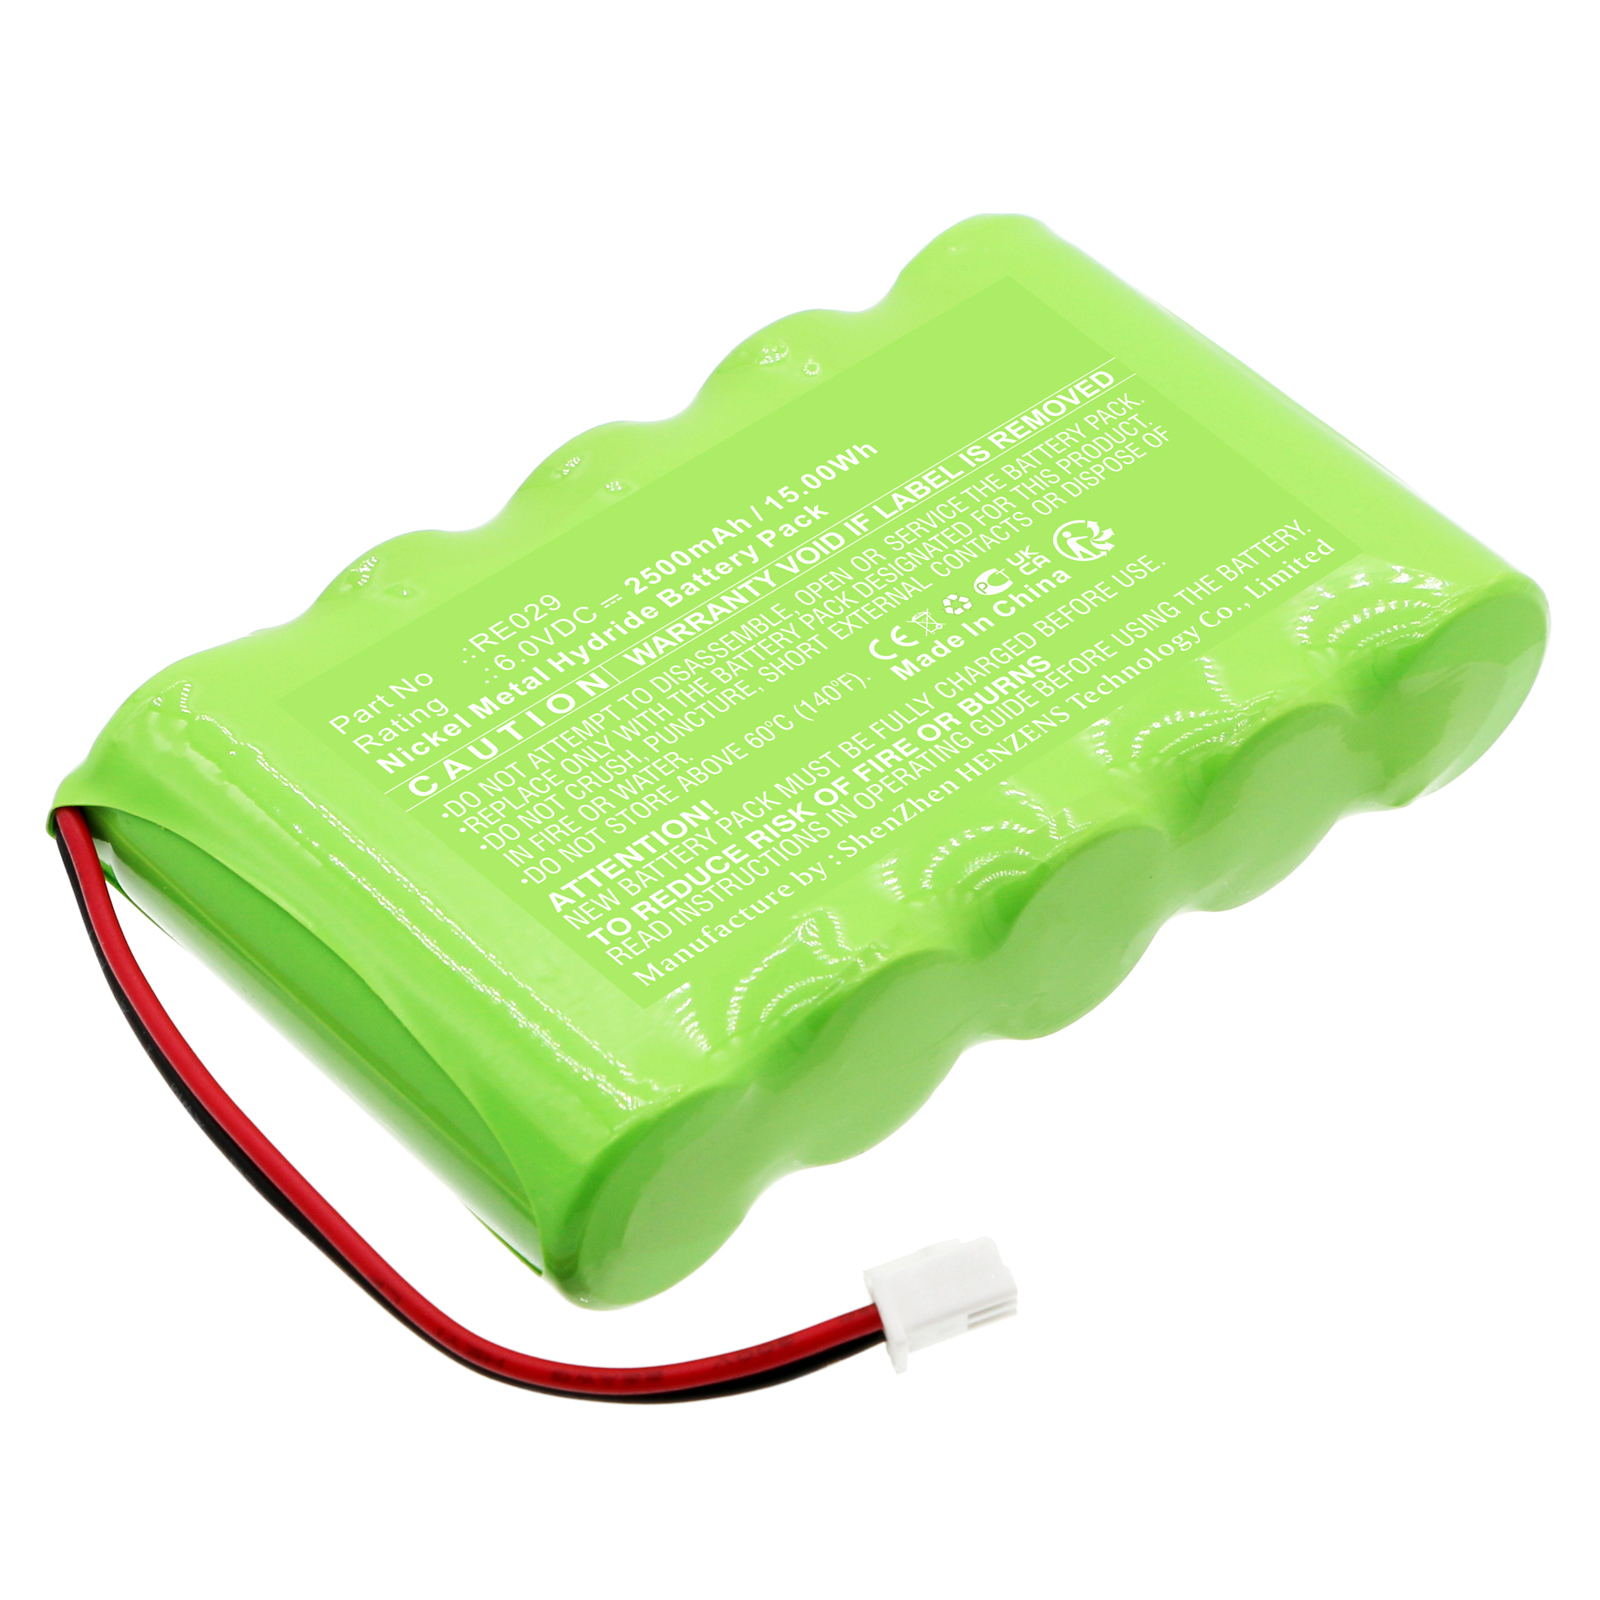 Batteries for HelixAlarm System